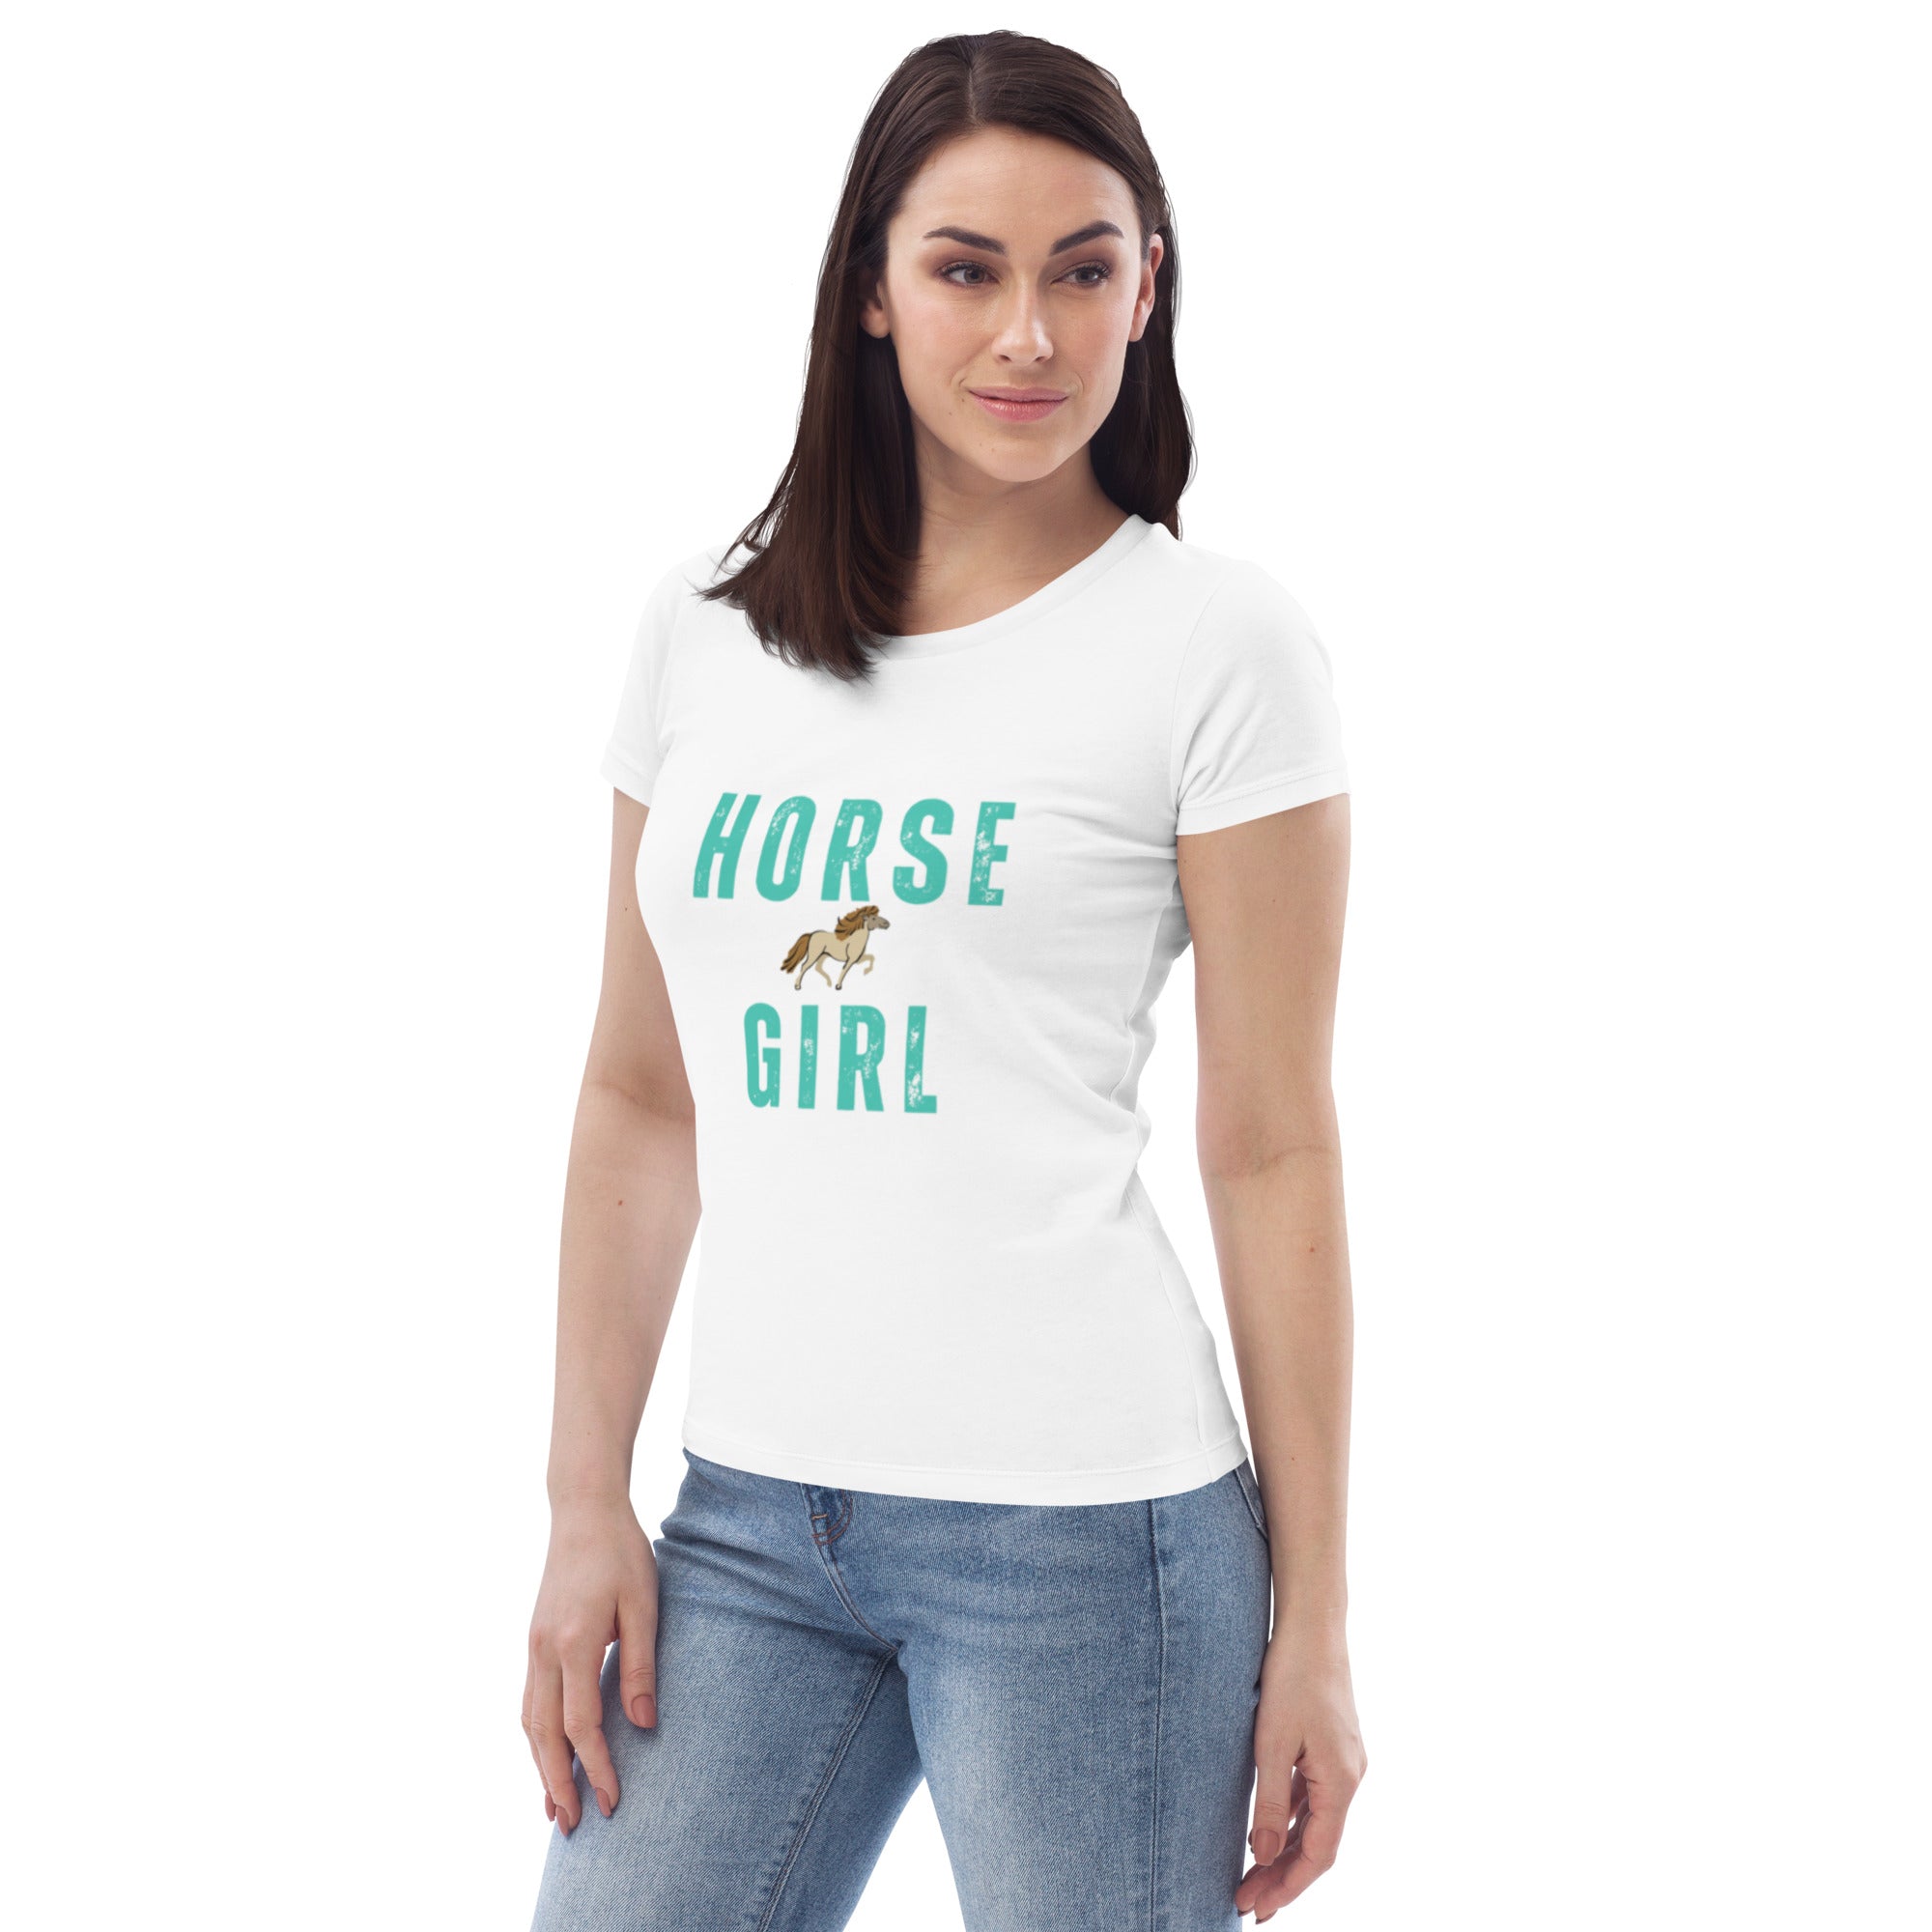 If you're a horse girl, then flaunt it Women's fitted eco tee